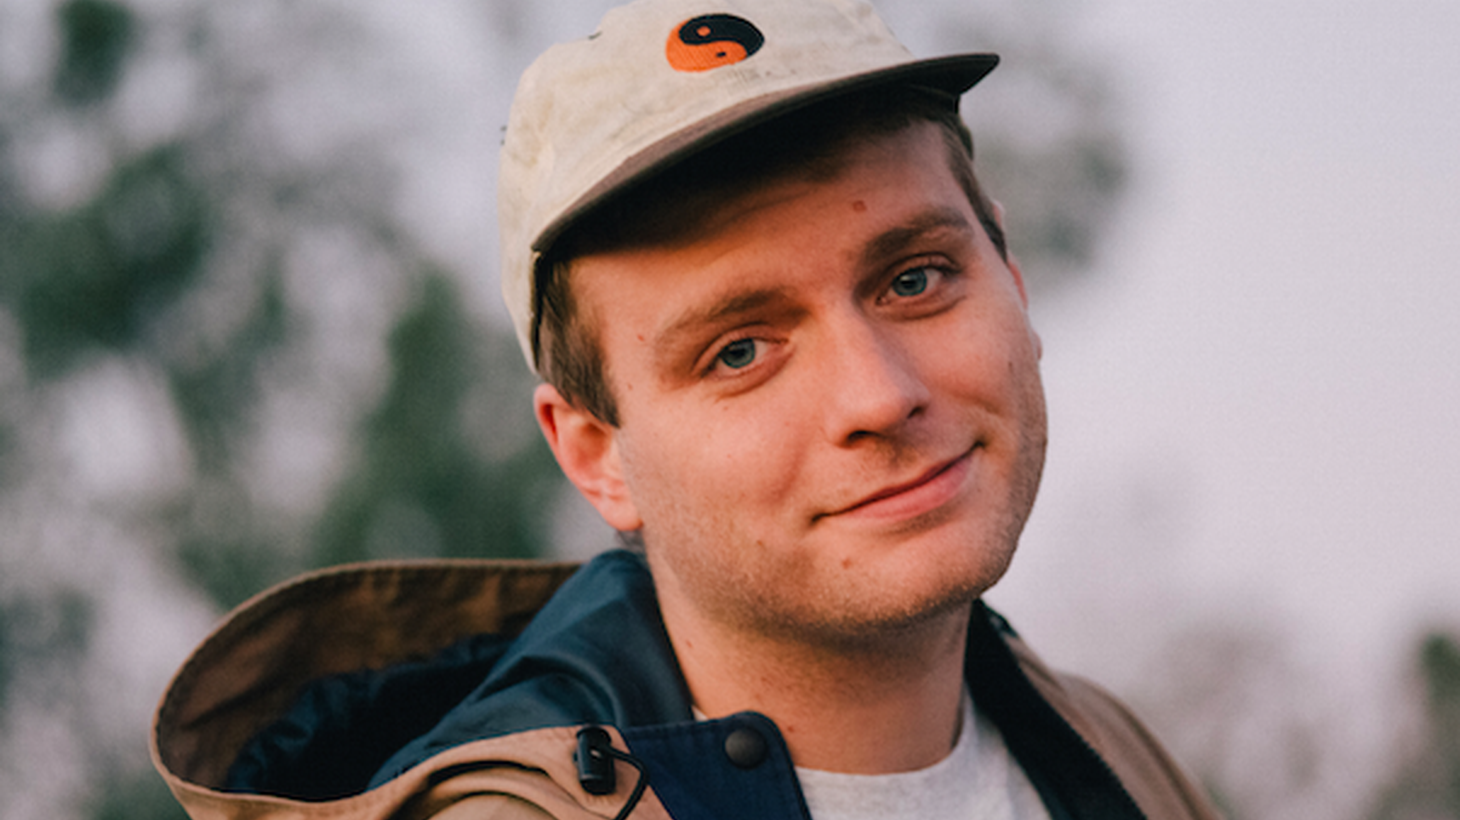 Mac Demarco is about to embark on his first solo tour and will give us a sneak peek with a short set at 10am.